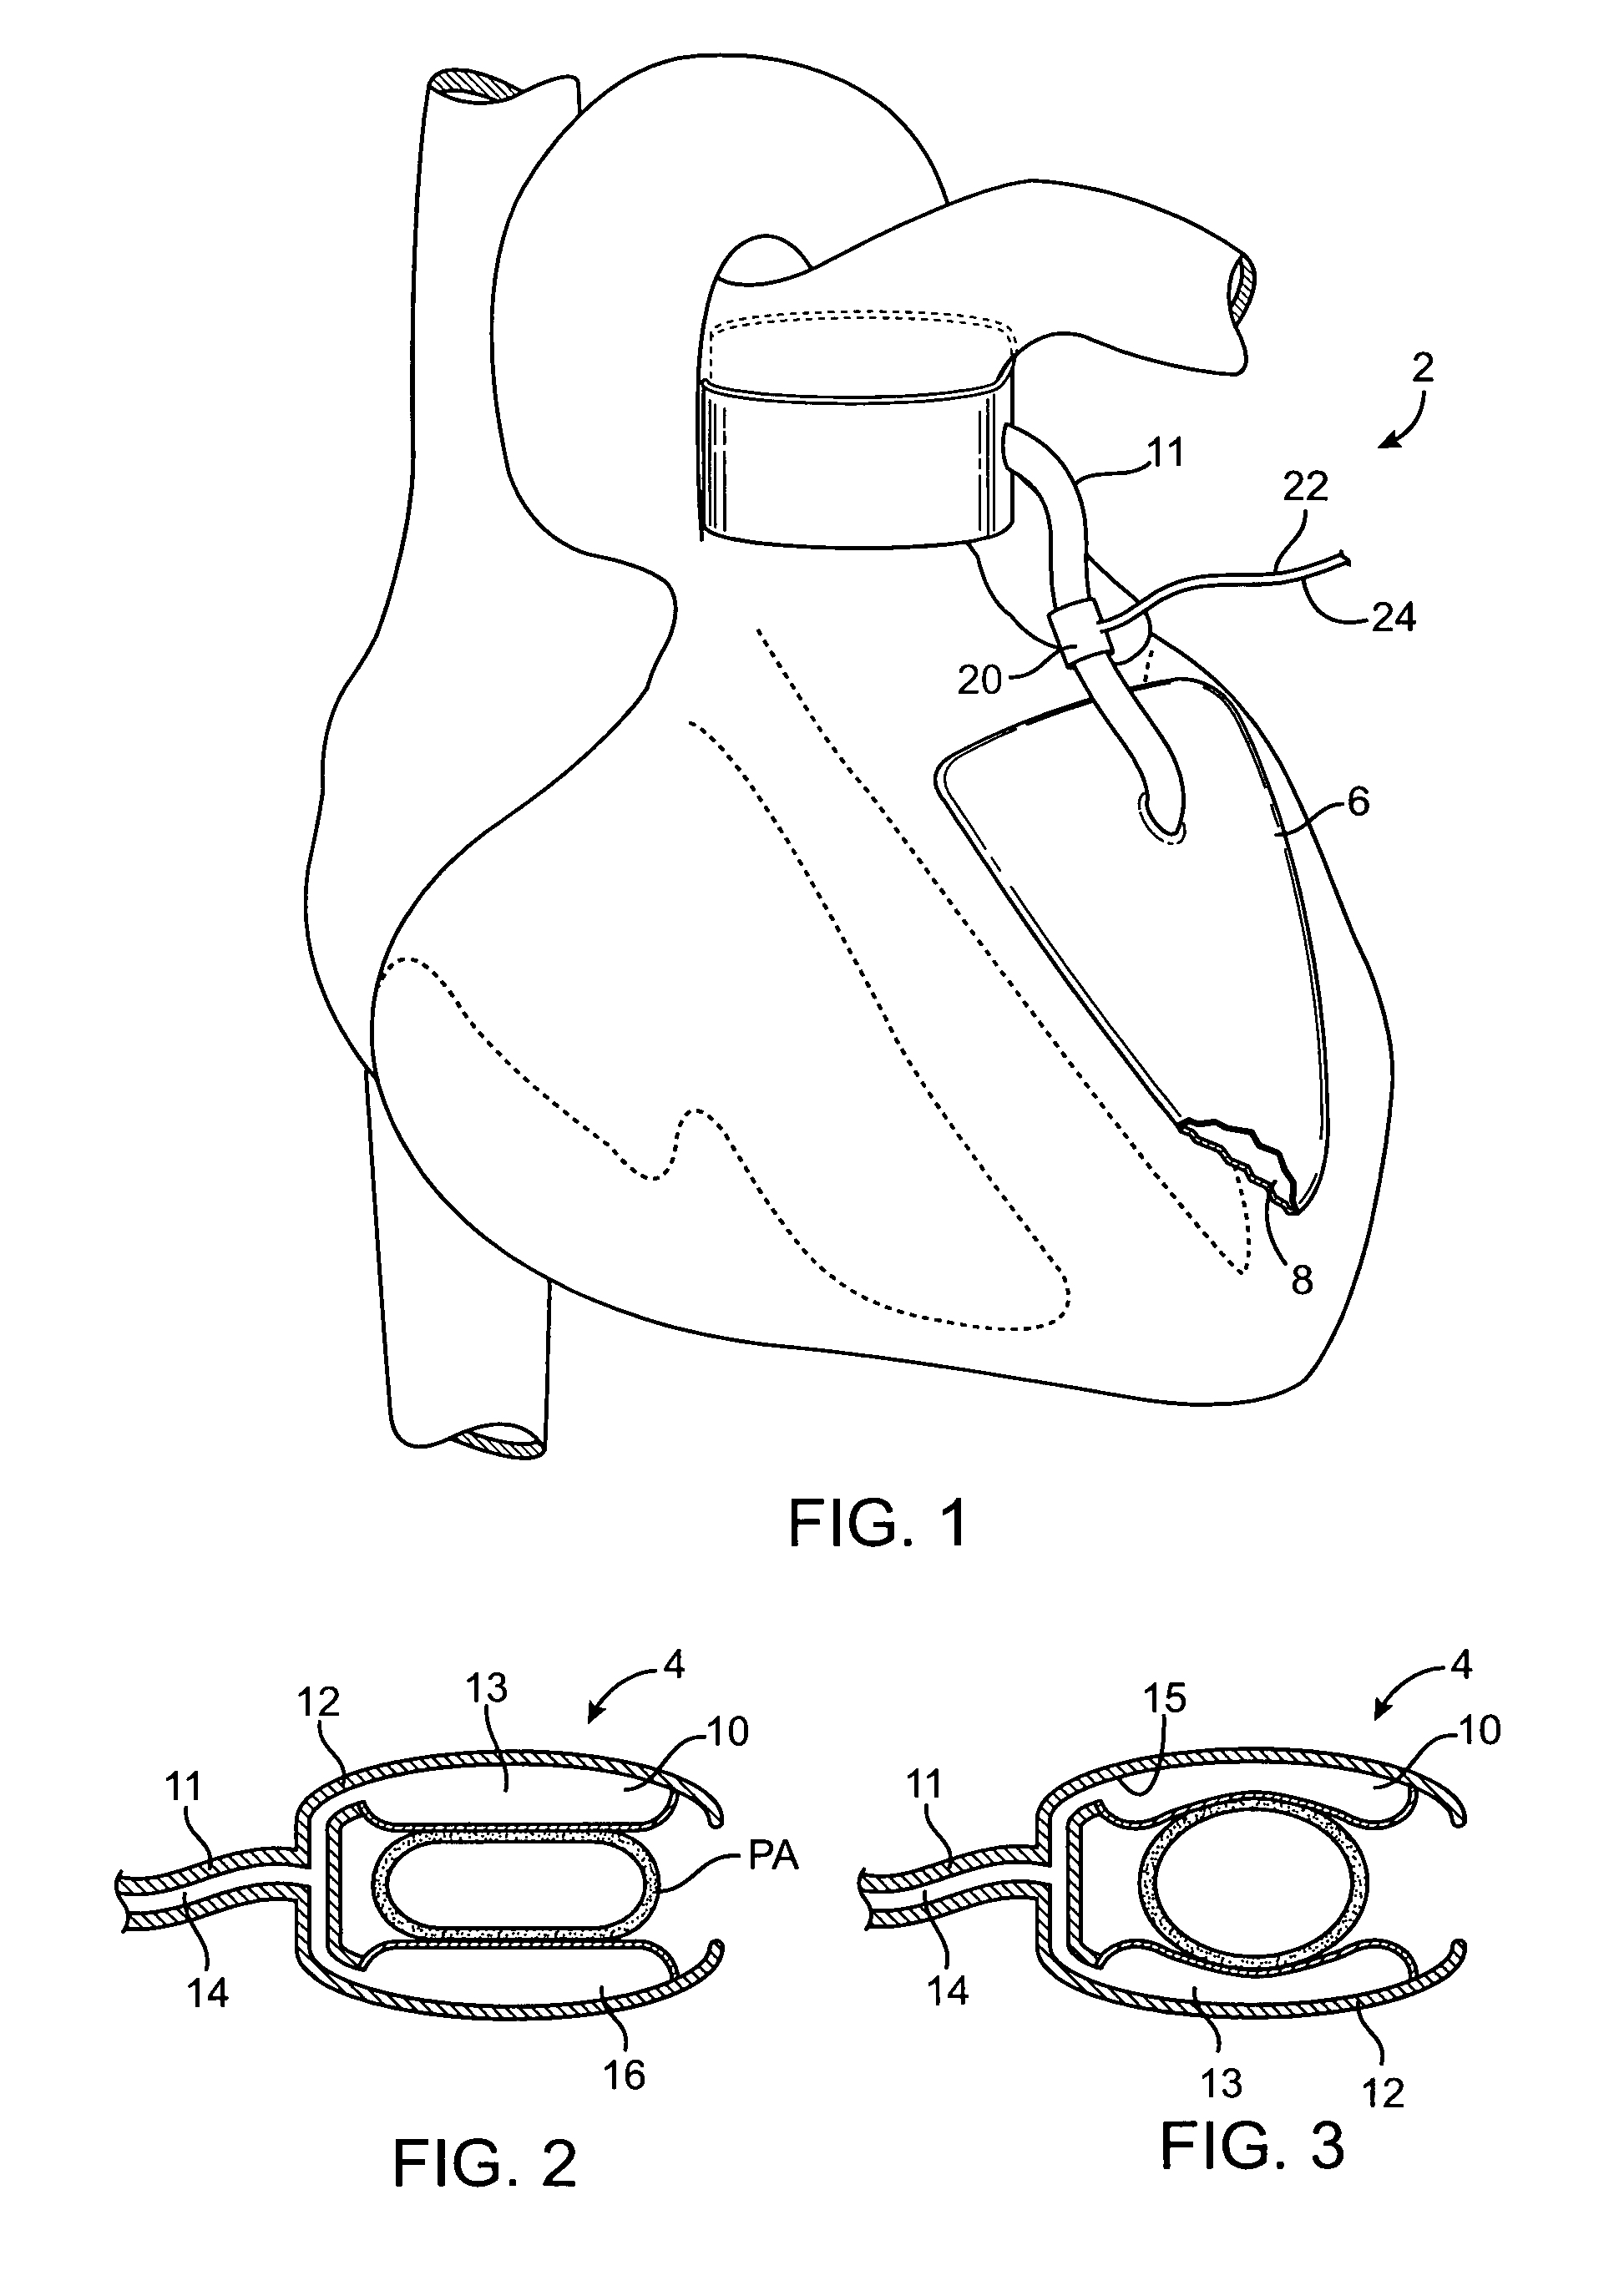 Devices and methods for absorbing, transferring and delivering heart energy